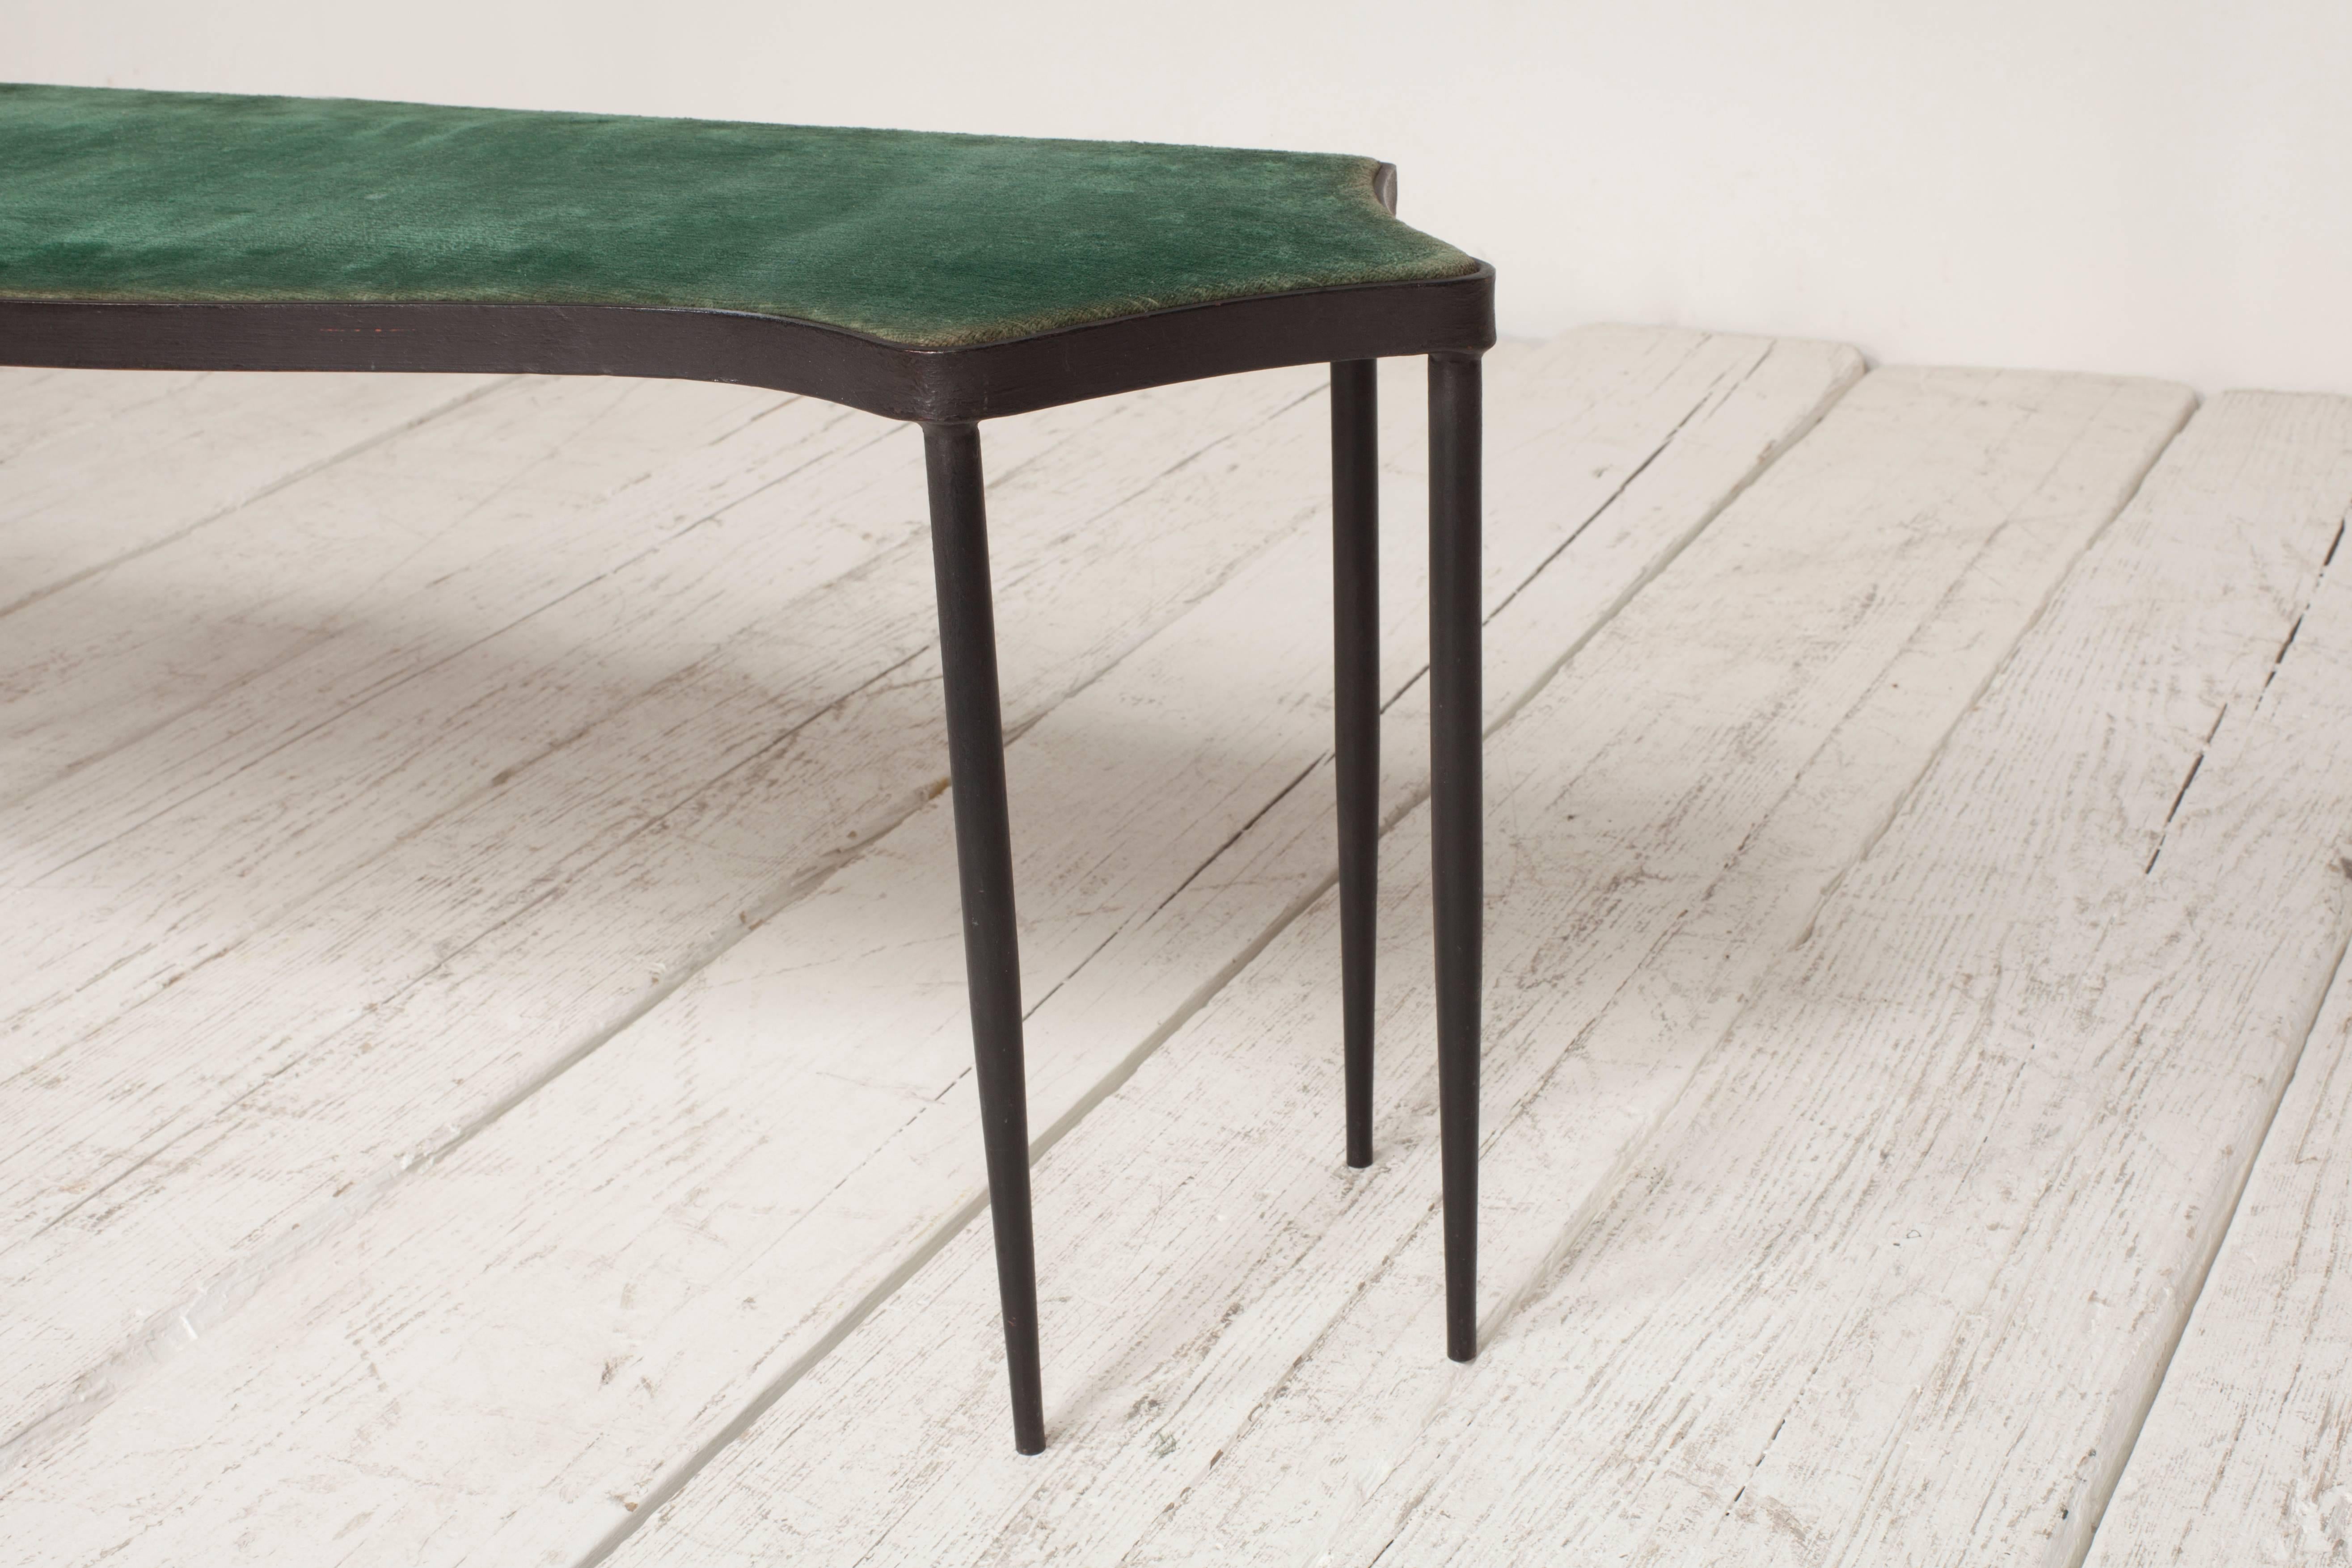 Early 20th Century Iron Framed Bench with Six Tapered Legs Upholstered in Original Green Velvet